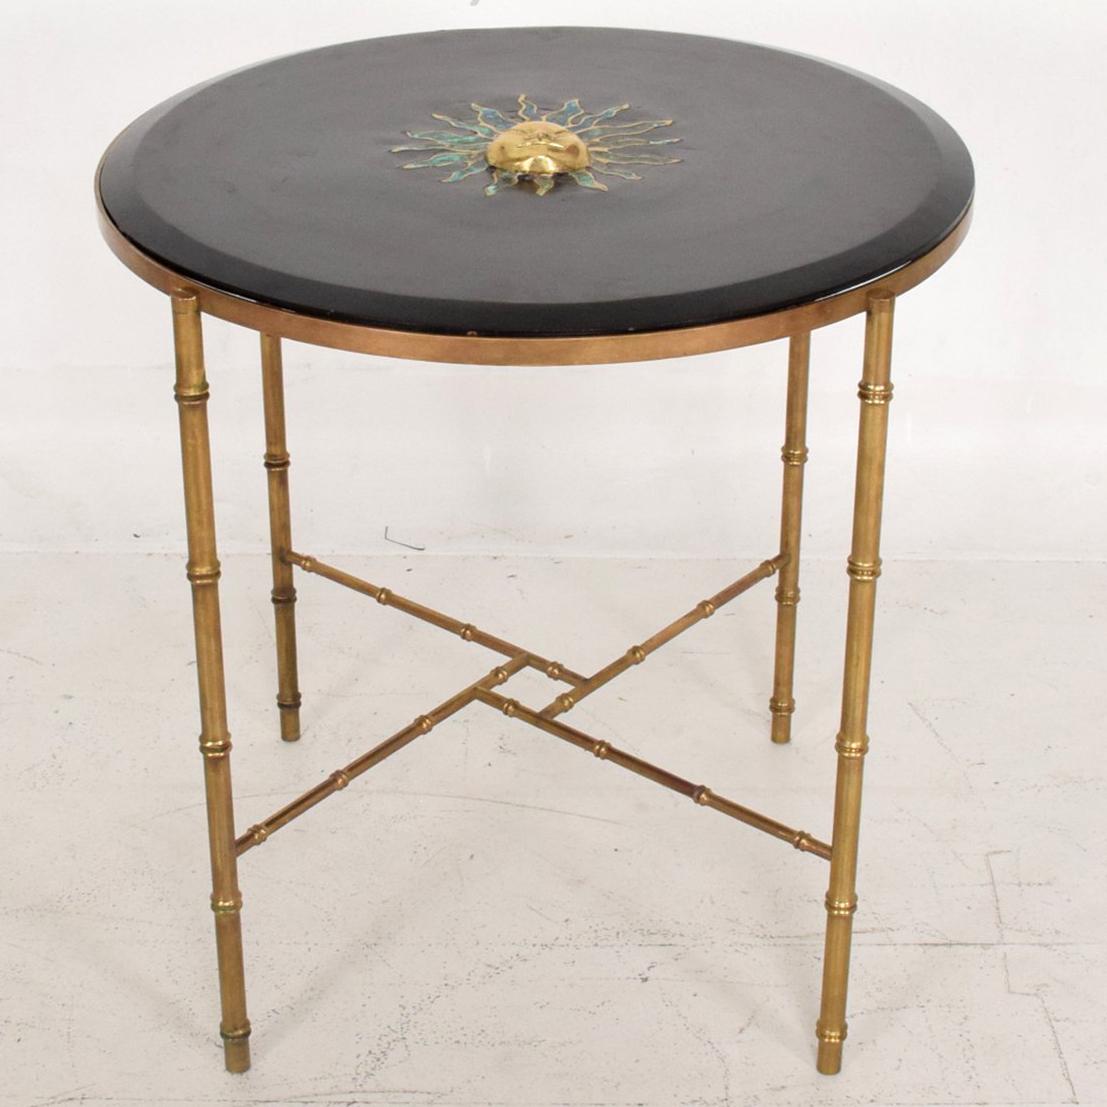 For your consideration a vintage center table. Round shape with faux bamboo in solid brass. Top is wood with beveled edges and iconic Pepe Mendoza sun sculpture in brass and malachite.

Mexico, circa late 1950s.

Measures: 26 1/2